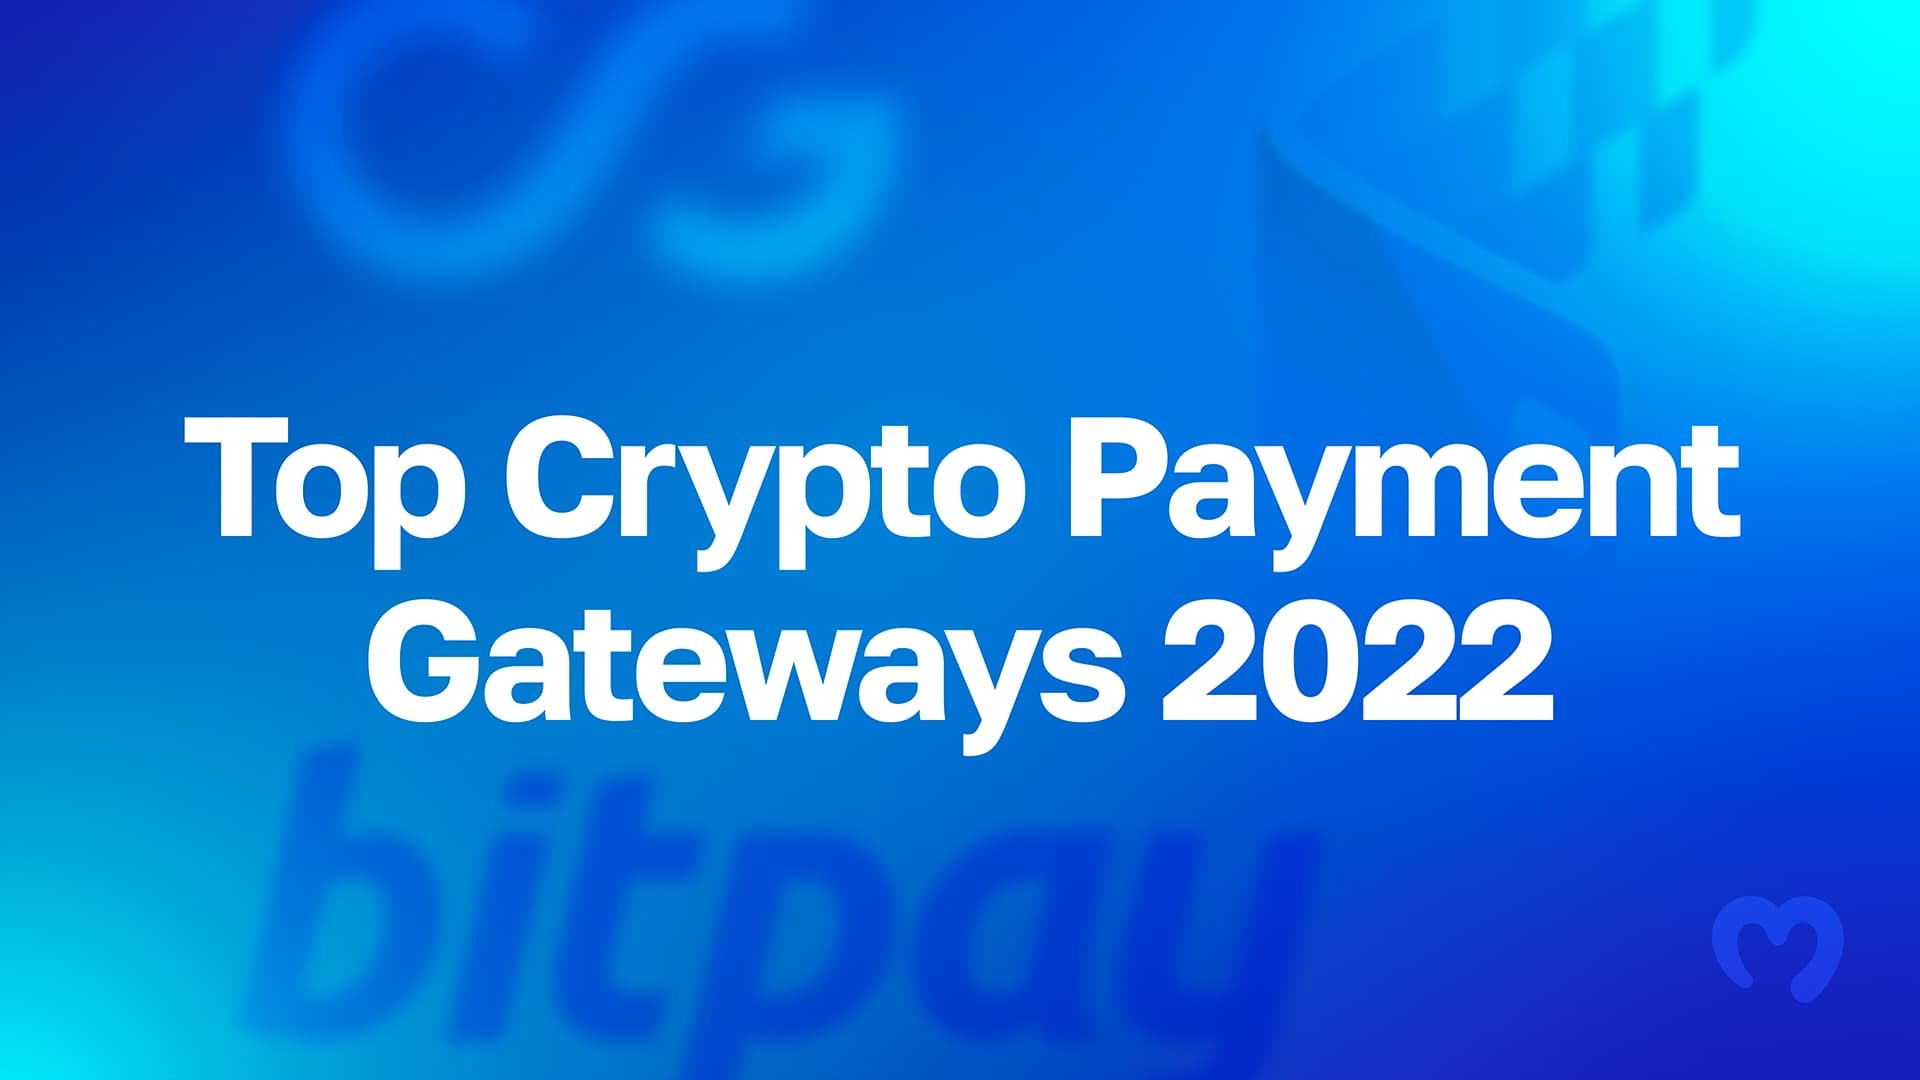 22_08_Top-Crypto-Payment-Gateways-2022